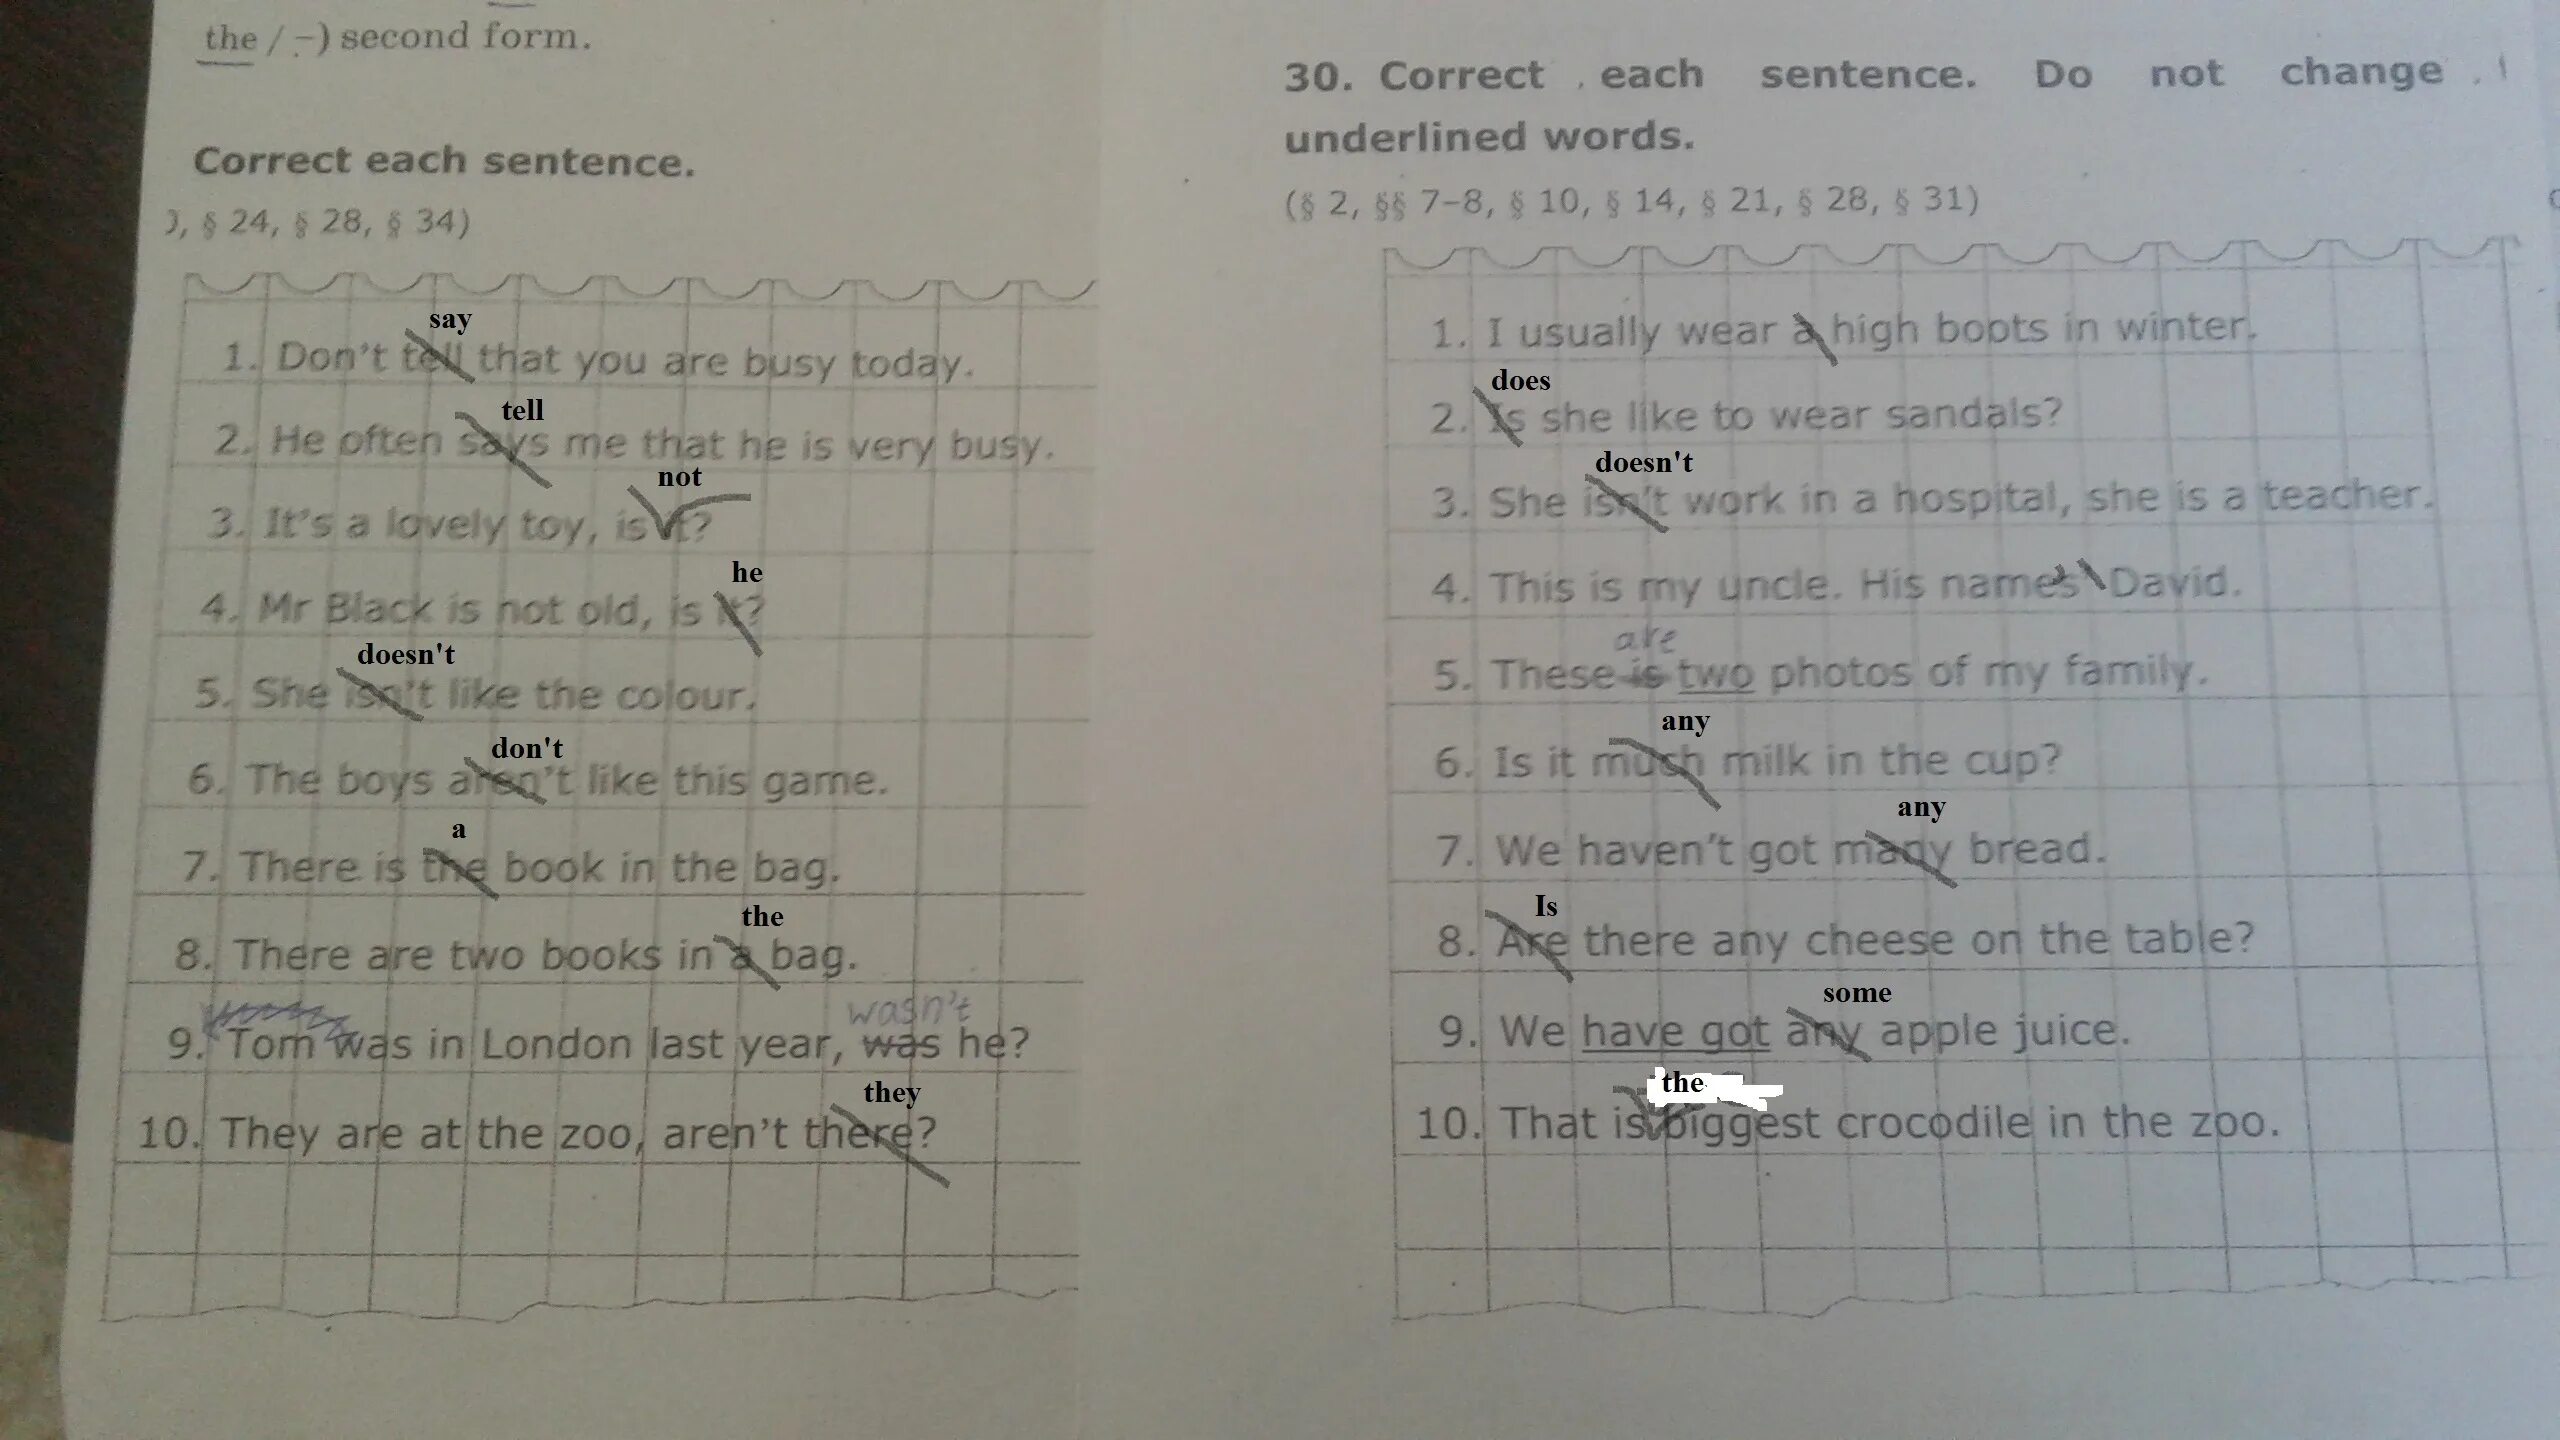 Correct each sentence перевод. Correct each sentence do not change the underlined Words. Correct each sentence do not change the underlined Words i Wonder where are they. 150. Correct each sentence. Do not change the underlined Words. ($$ 12-13, $ 36, § 40, § 42)Your Dog never Plays, doesn't it?. There is mistake in each sentence